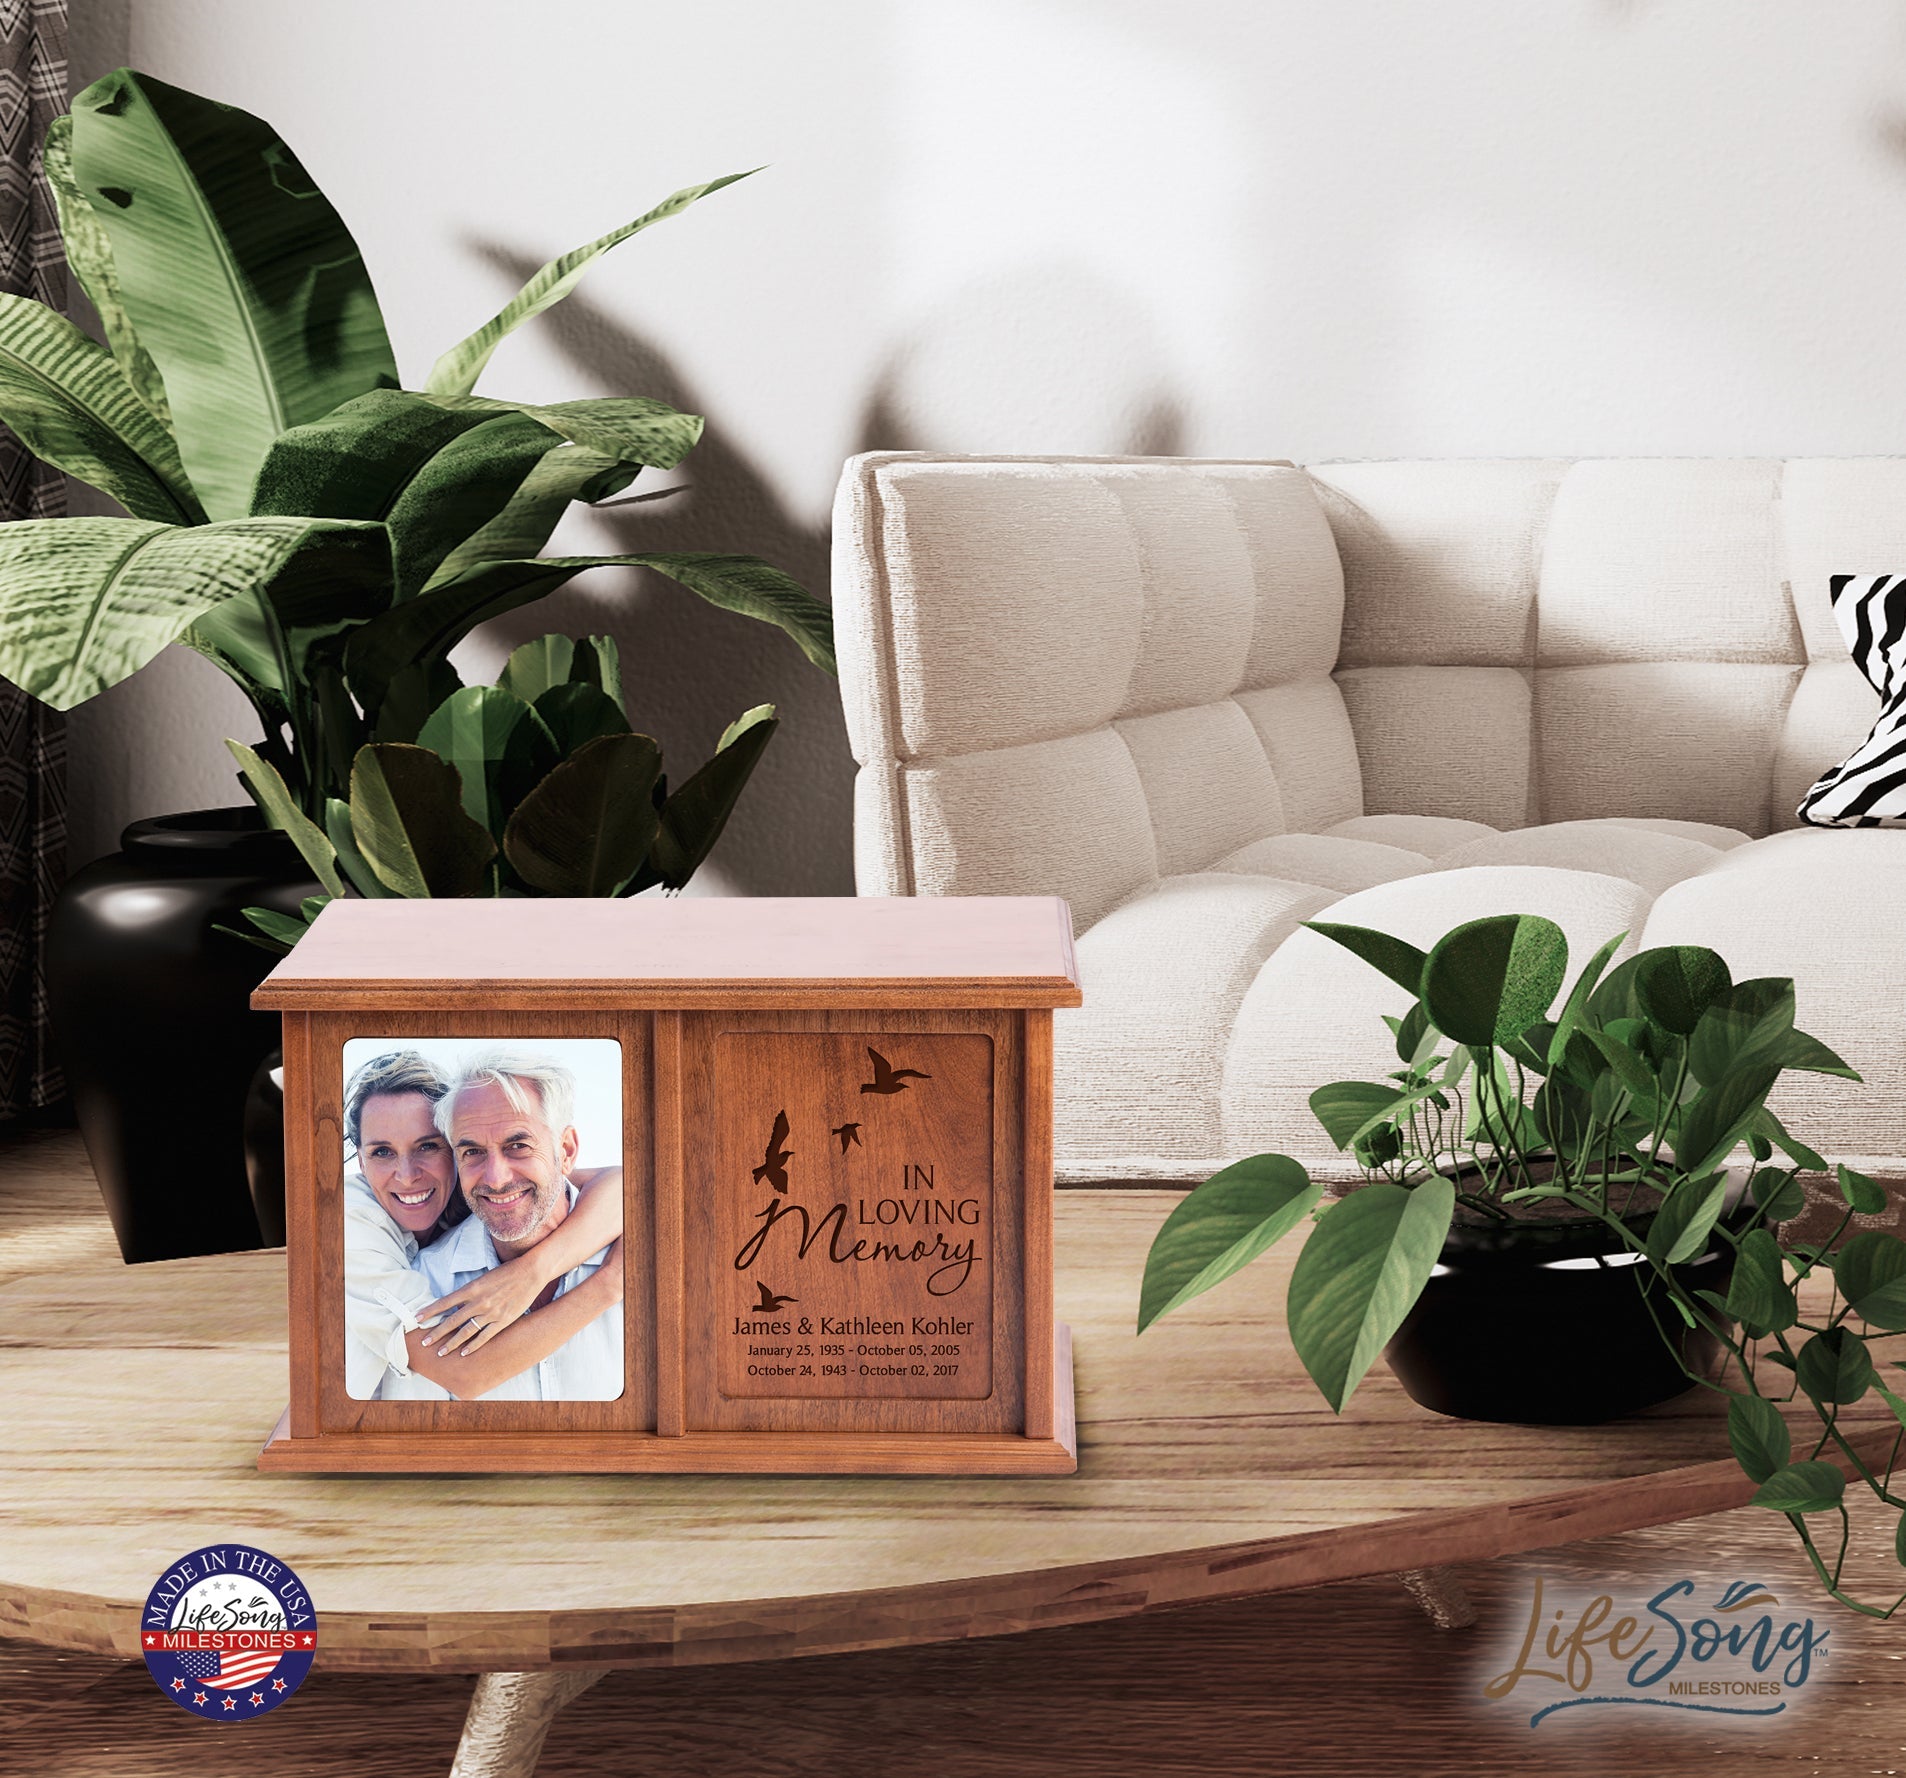 Personalized Extra Large Companion Urn Wooden Cremation Urn Box - In Loving Memory (Birds) - LifeSong Milestones